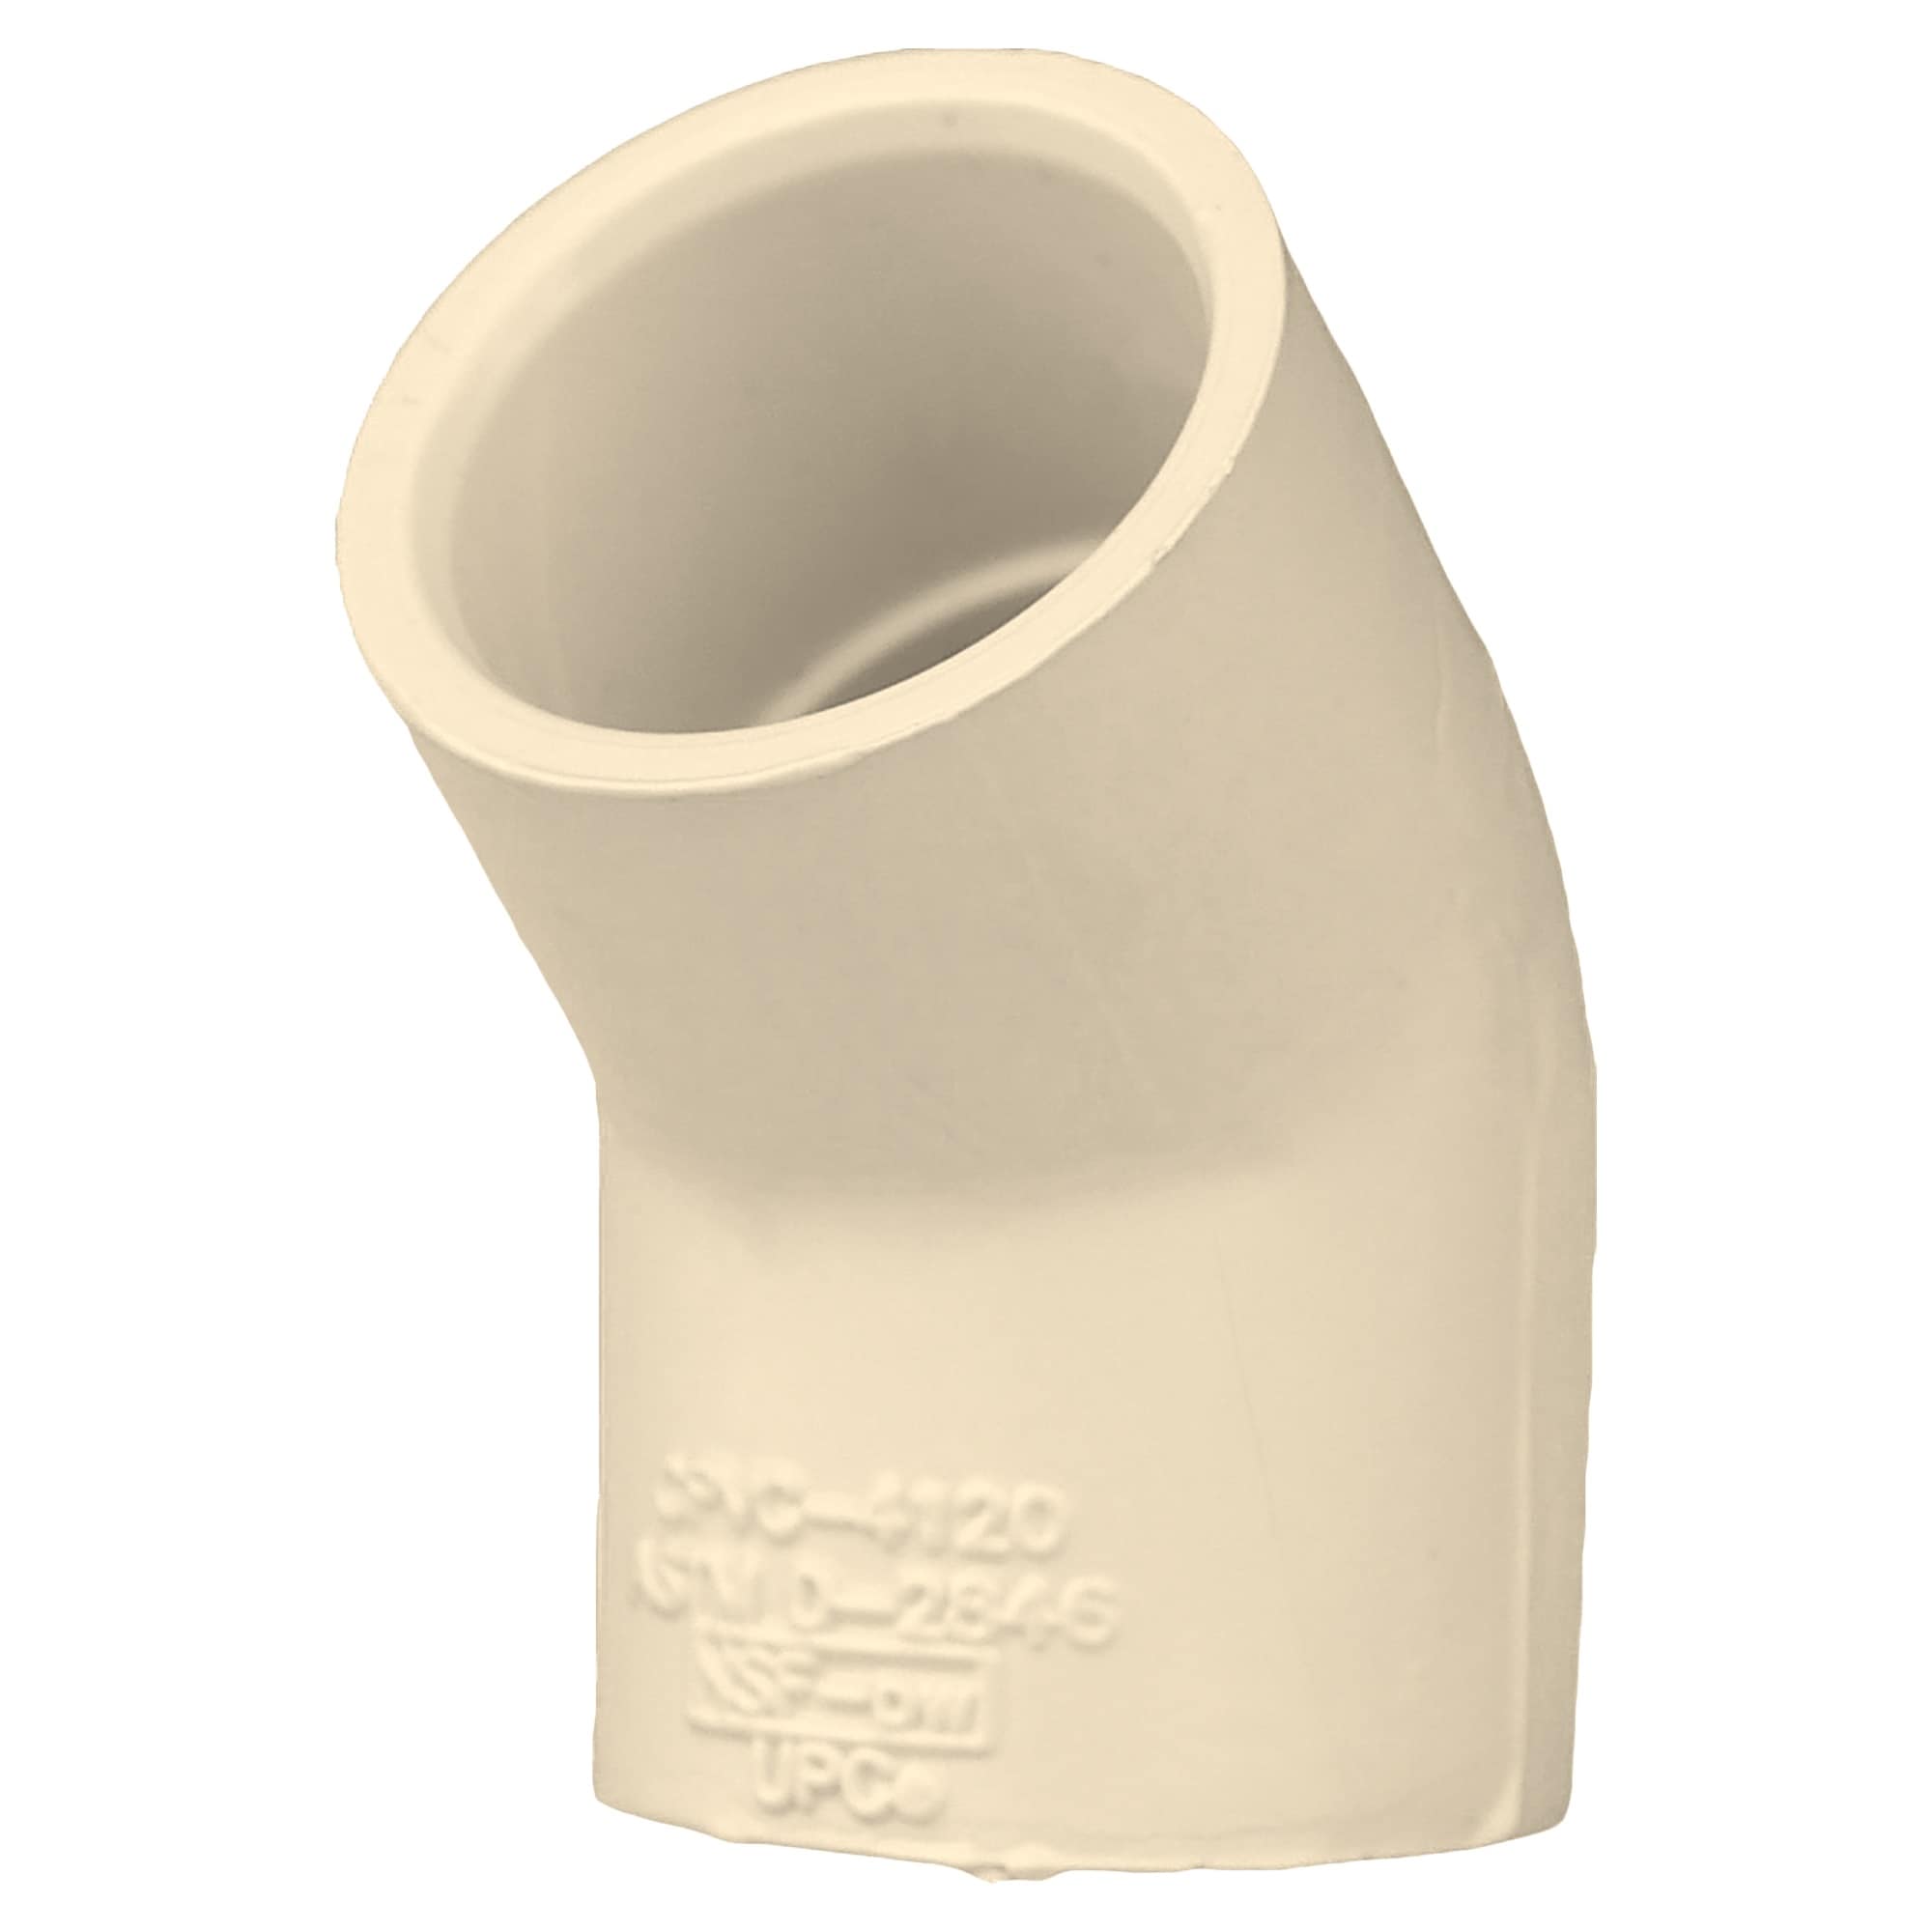 Charlotte Pipe 1-in 45-Degree CPVC Elbow for Potable Water Distribution - Cream Color, 100 PSI, NSF Approved | CTS 02309 1000 -  CTS023091000